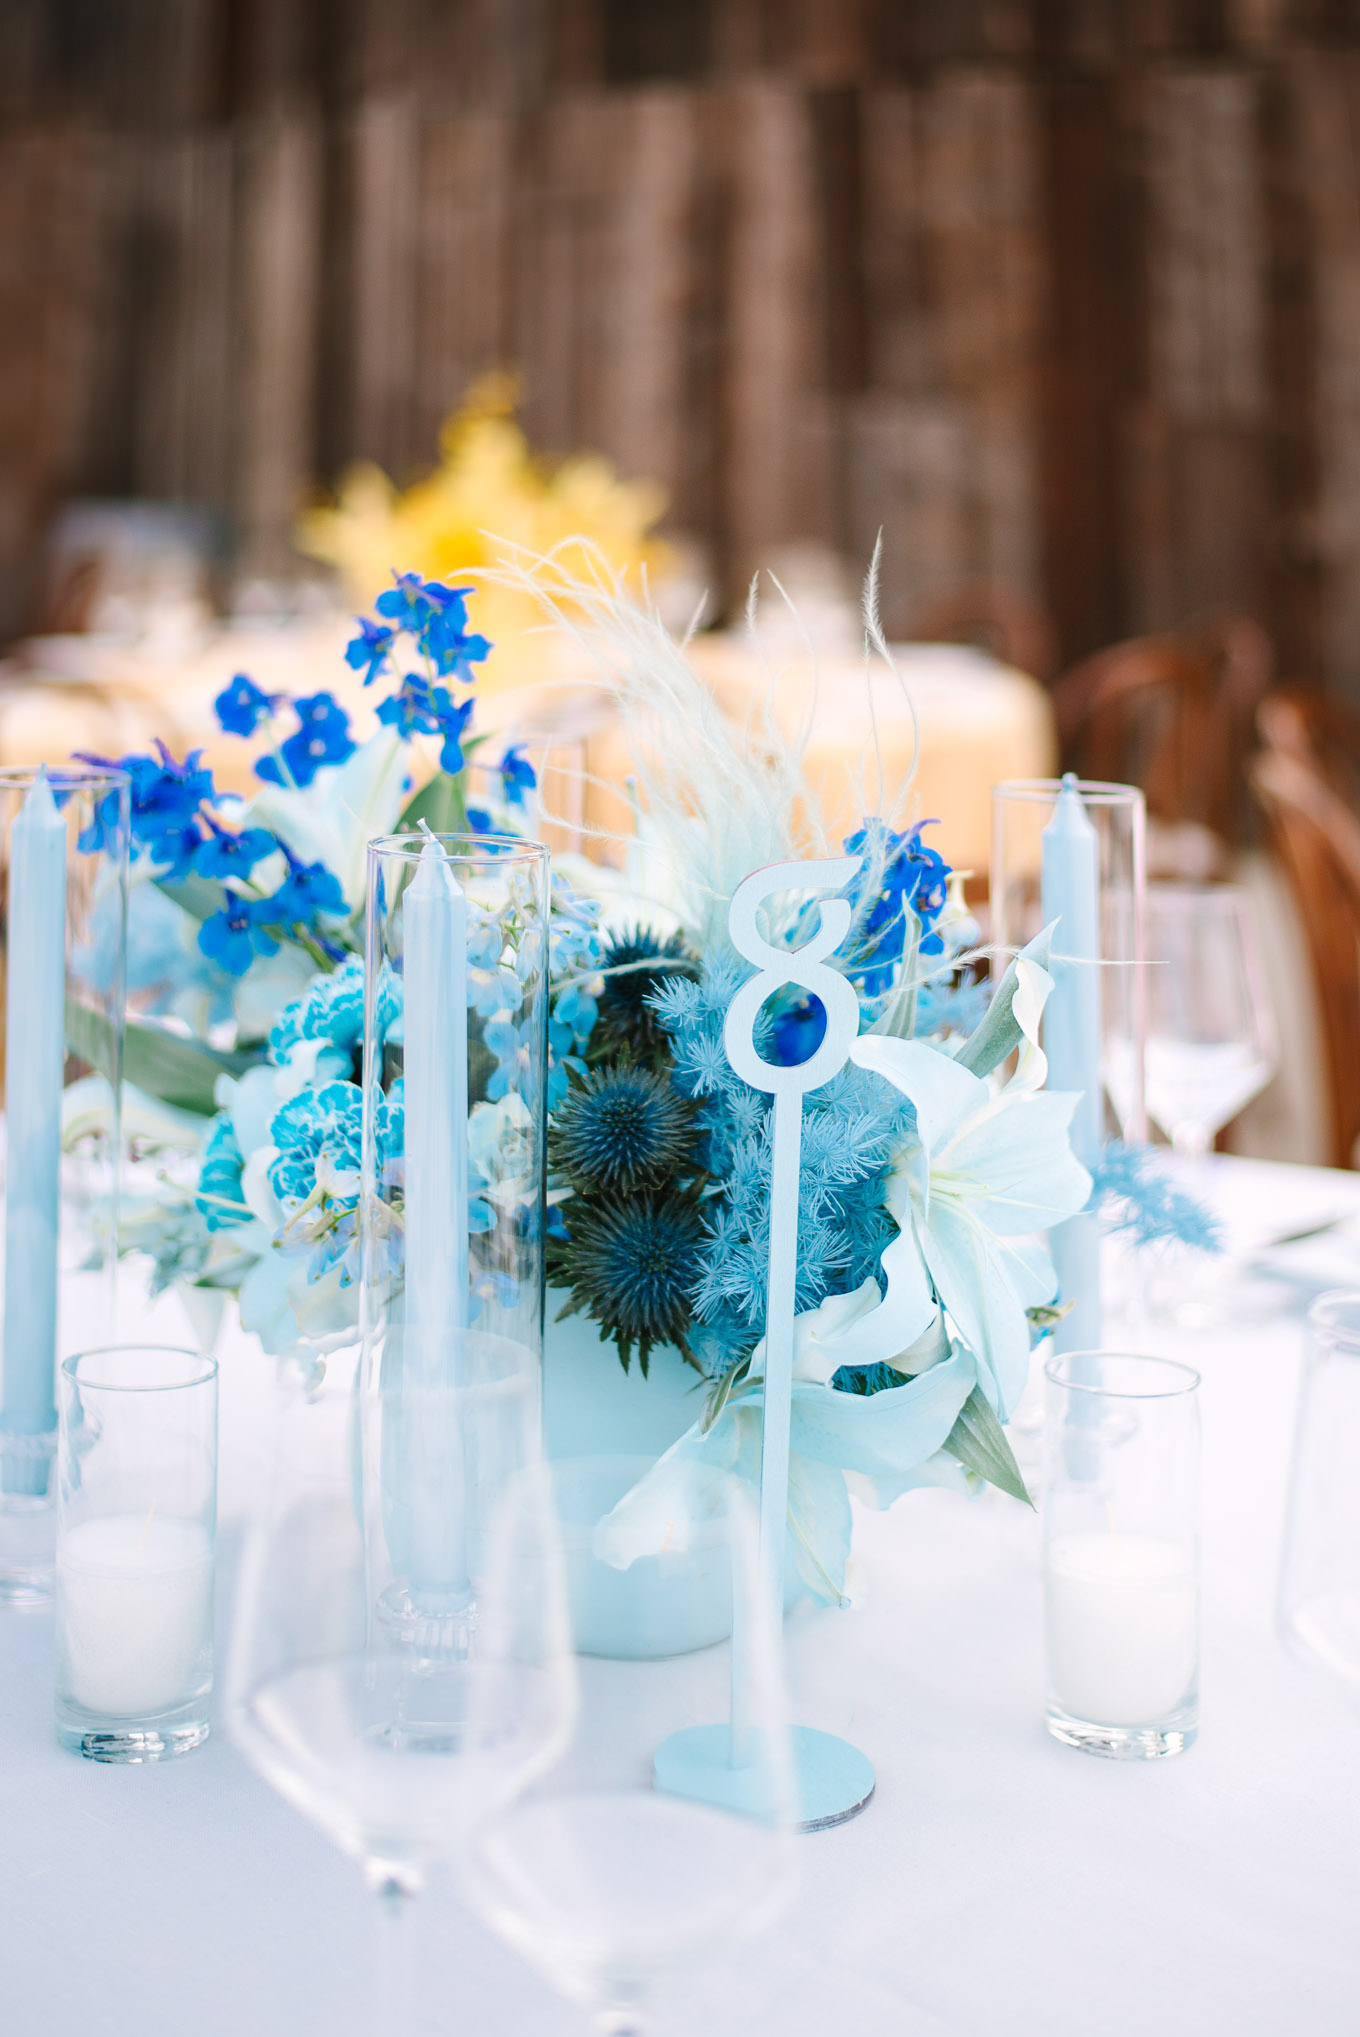 Monochromatic pastel wedding tables | Colorful and quirky wedding at Higuera Ranch in San Luis Obispo | #sanluisobispowedding #californiawedding #higueraranch #madonnainn   
Source: Mary Costa Photography | Los Angeles